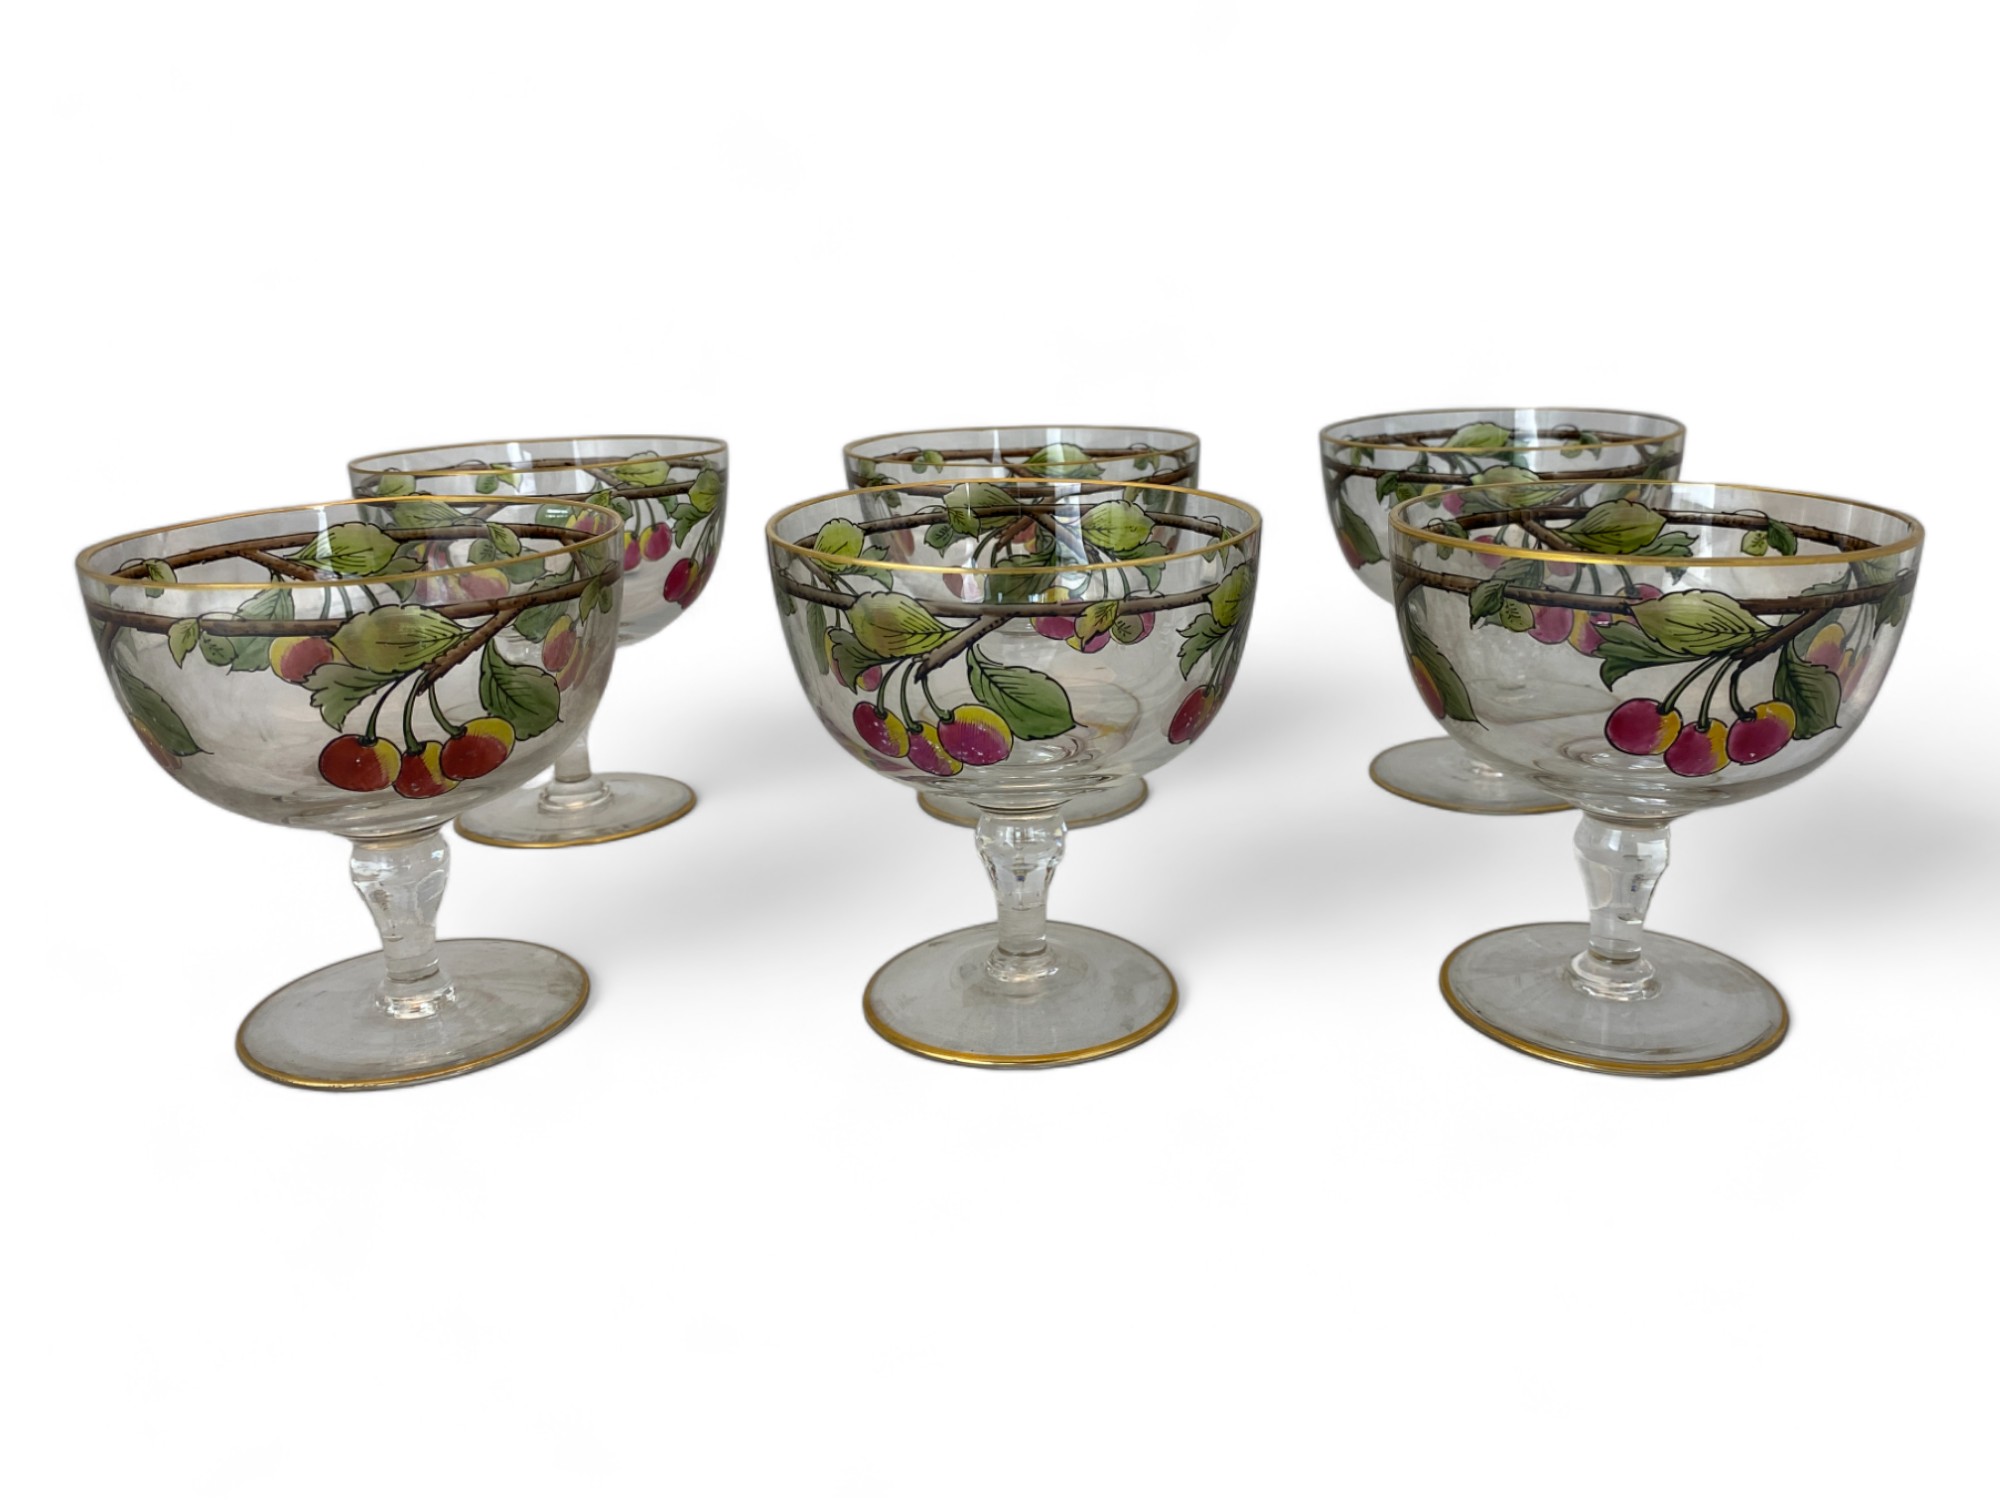 A set of six wine glasses or champagne bowls attributed to Stuart & Webb Corbett